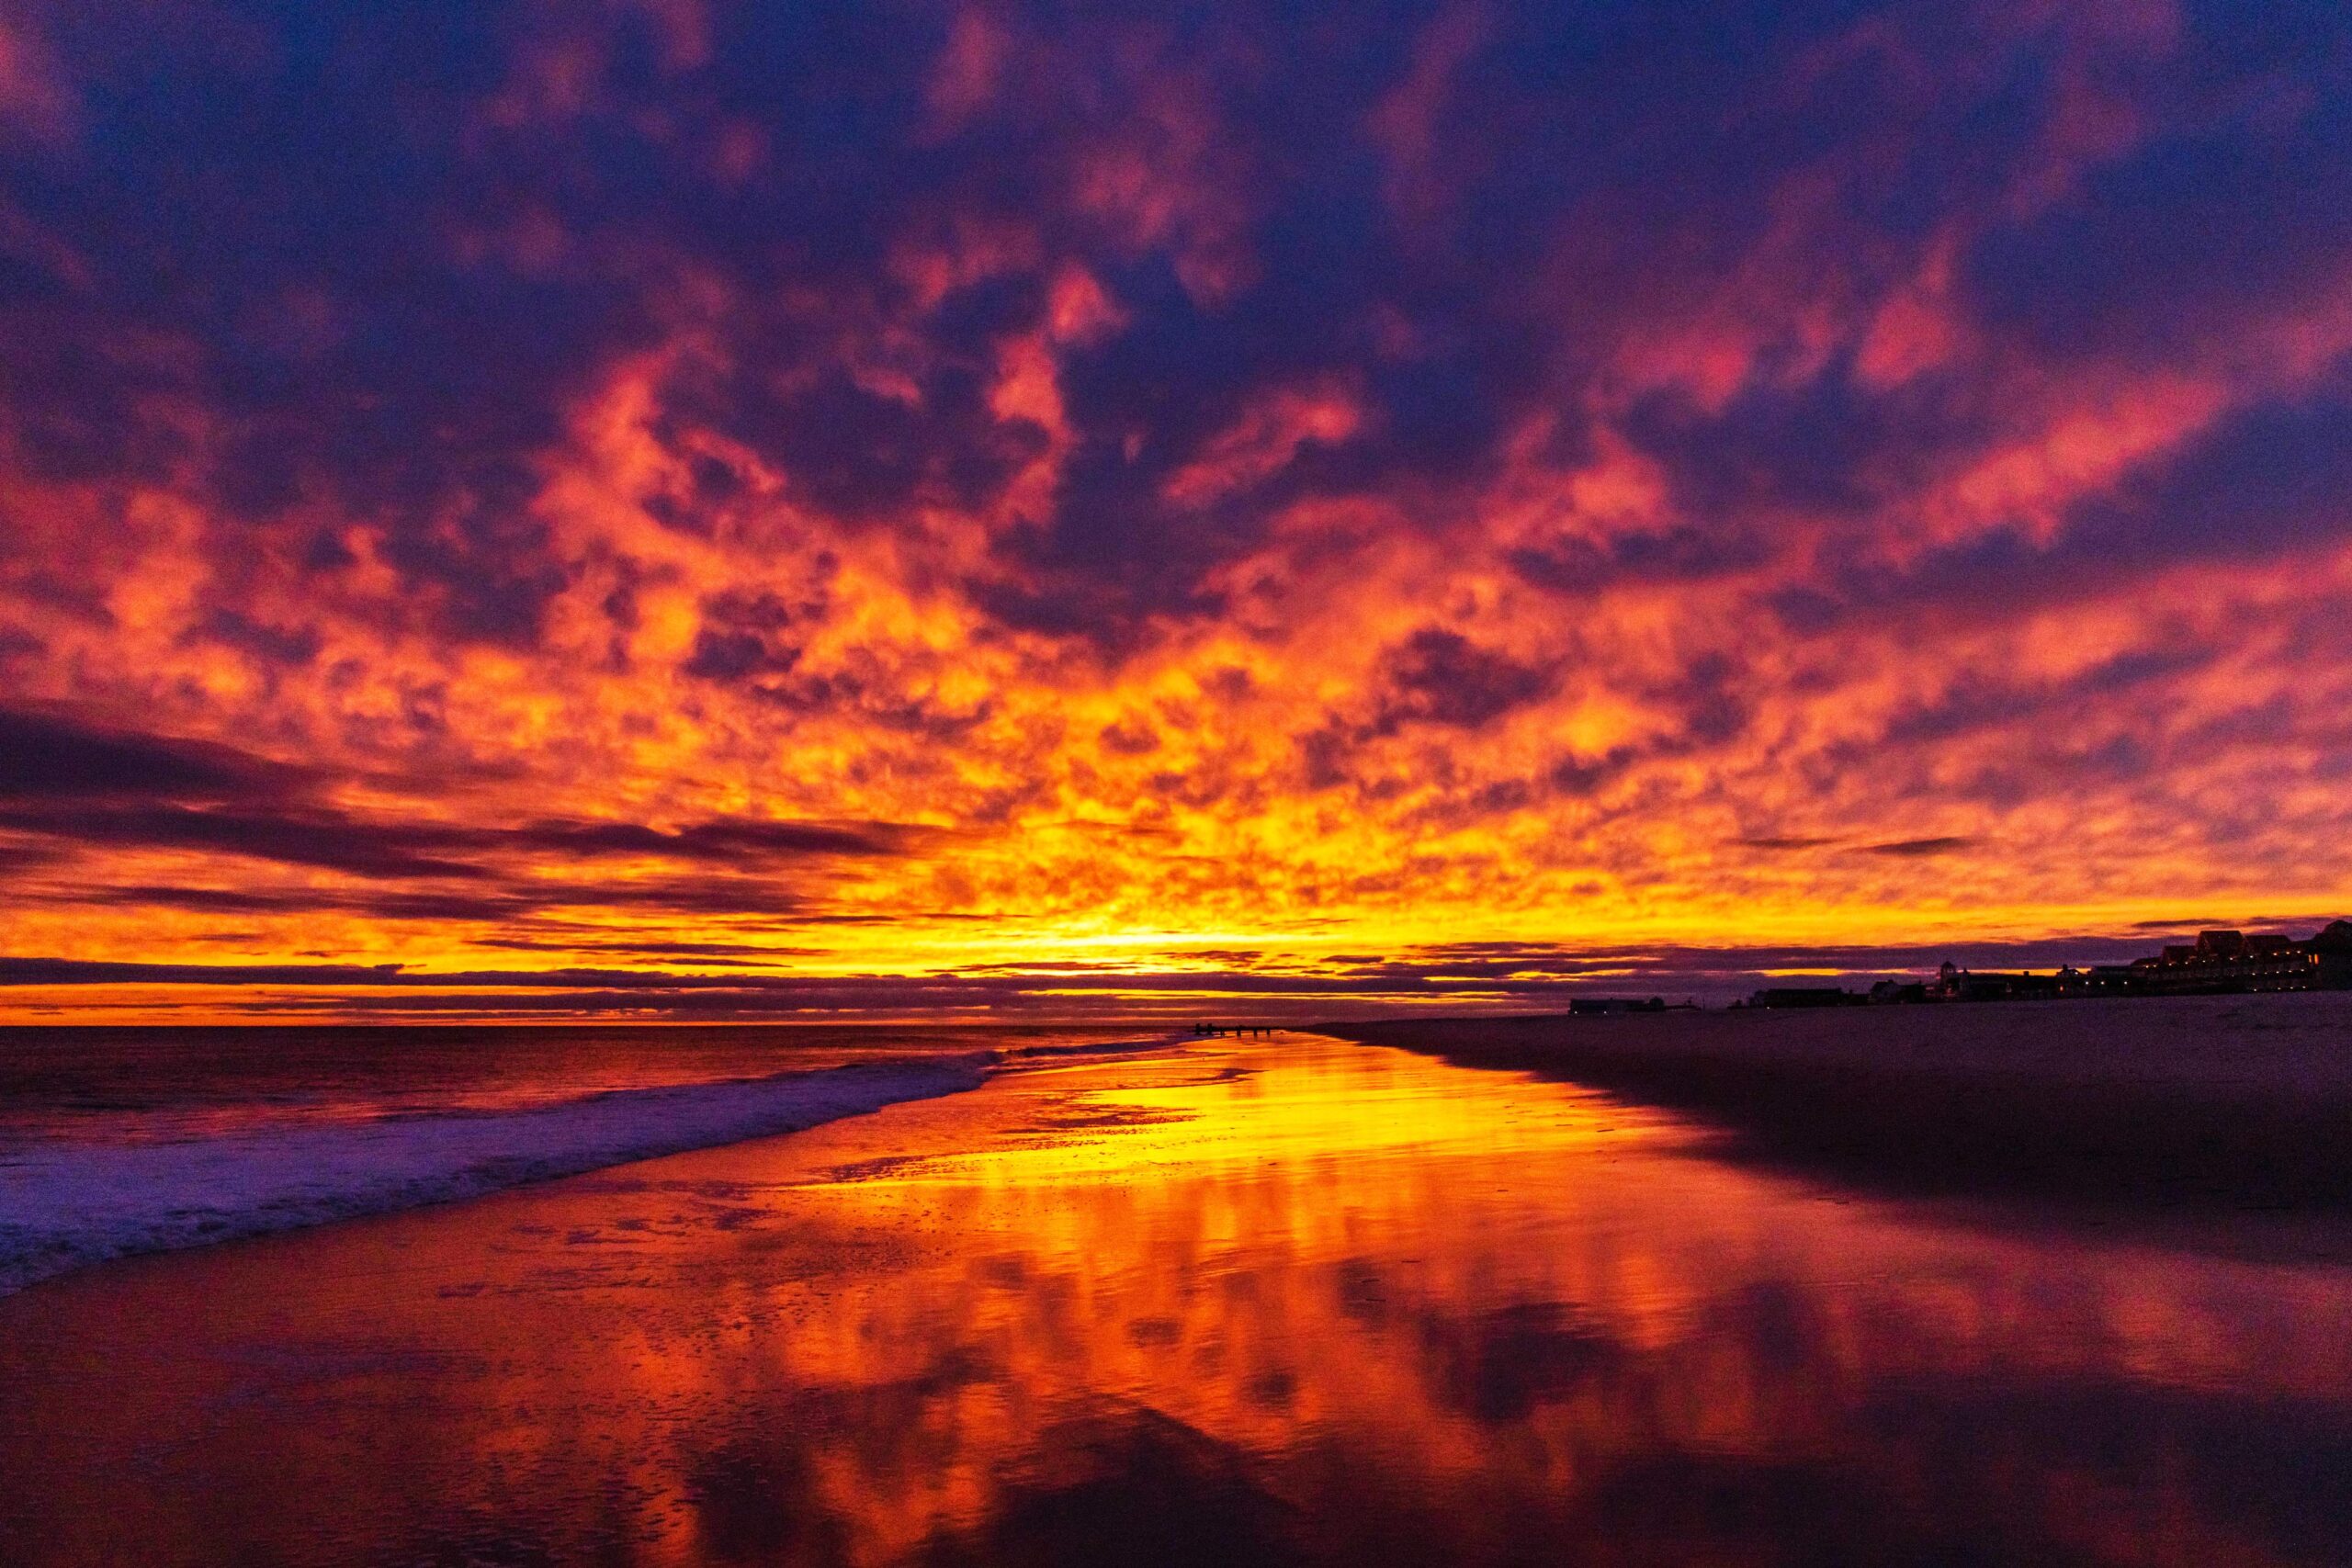 Brilliant purple, pink, orange, and yellow clouds in the sky at sunset, reflected in the ocean and the shoreline at the beach